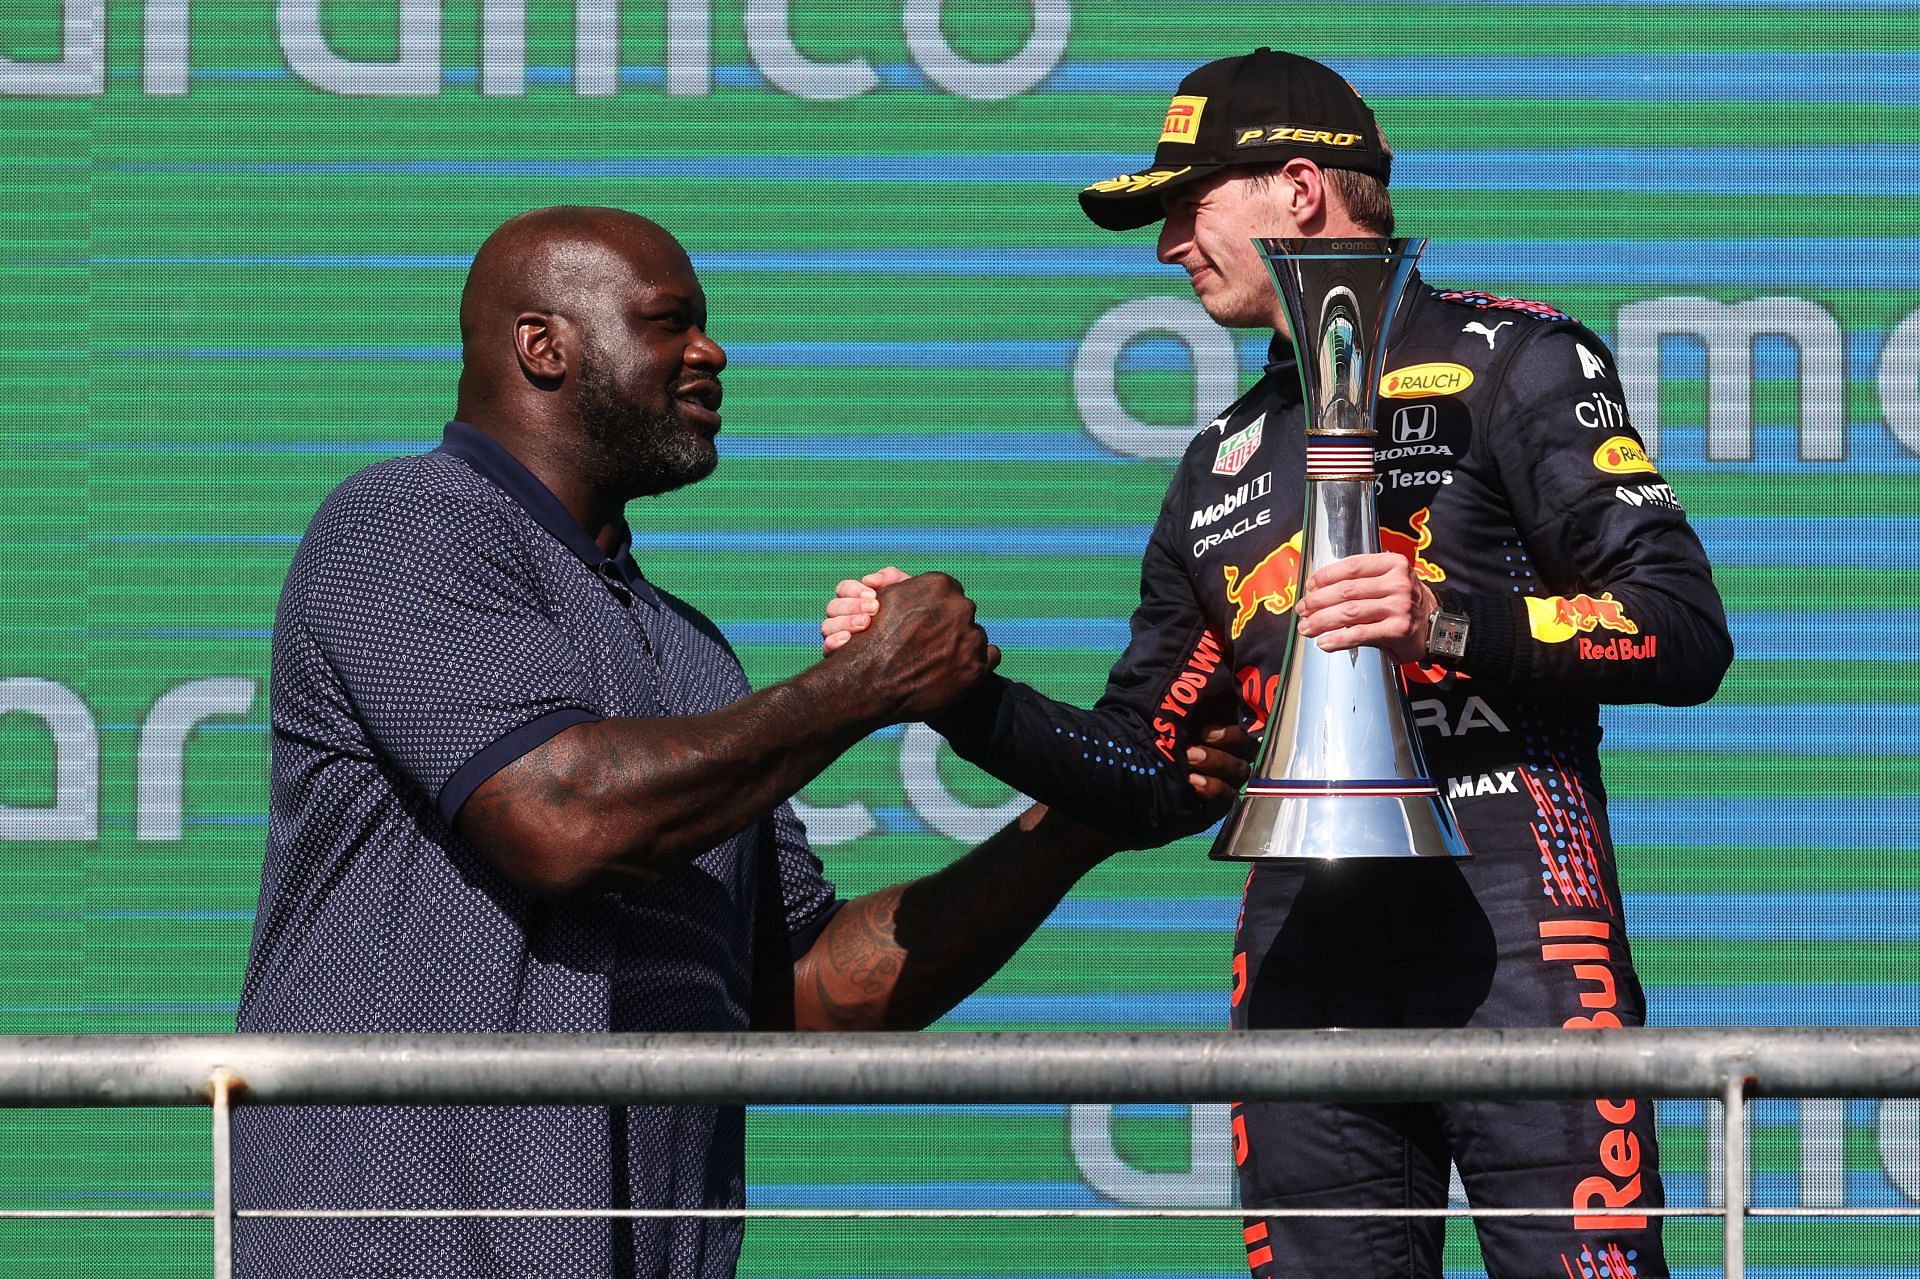 Max Verstappen of Red Bull Racing celebrates with NBA legend Shaquille O&#039;Neal during the F1 Grand Prix of USA 2021 in Austin